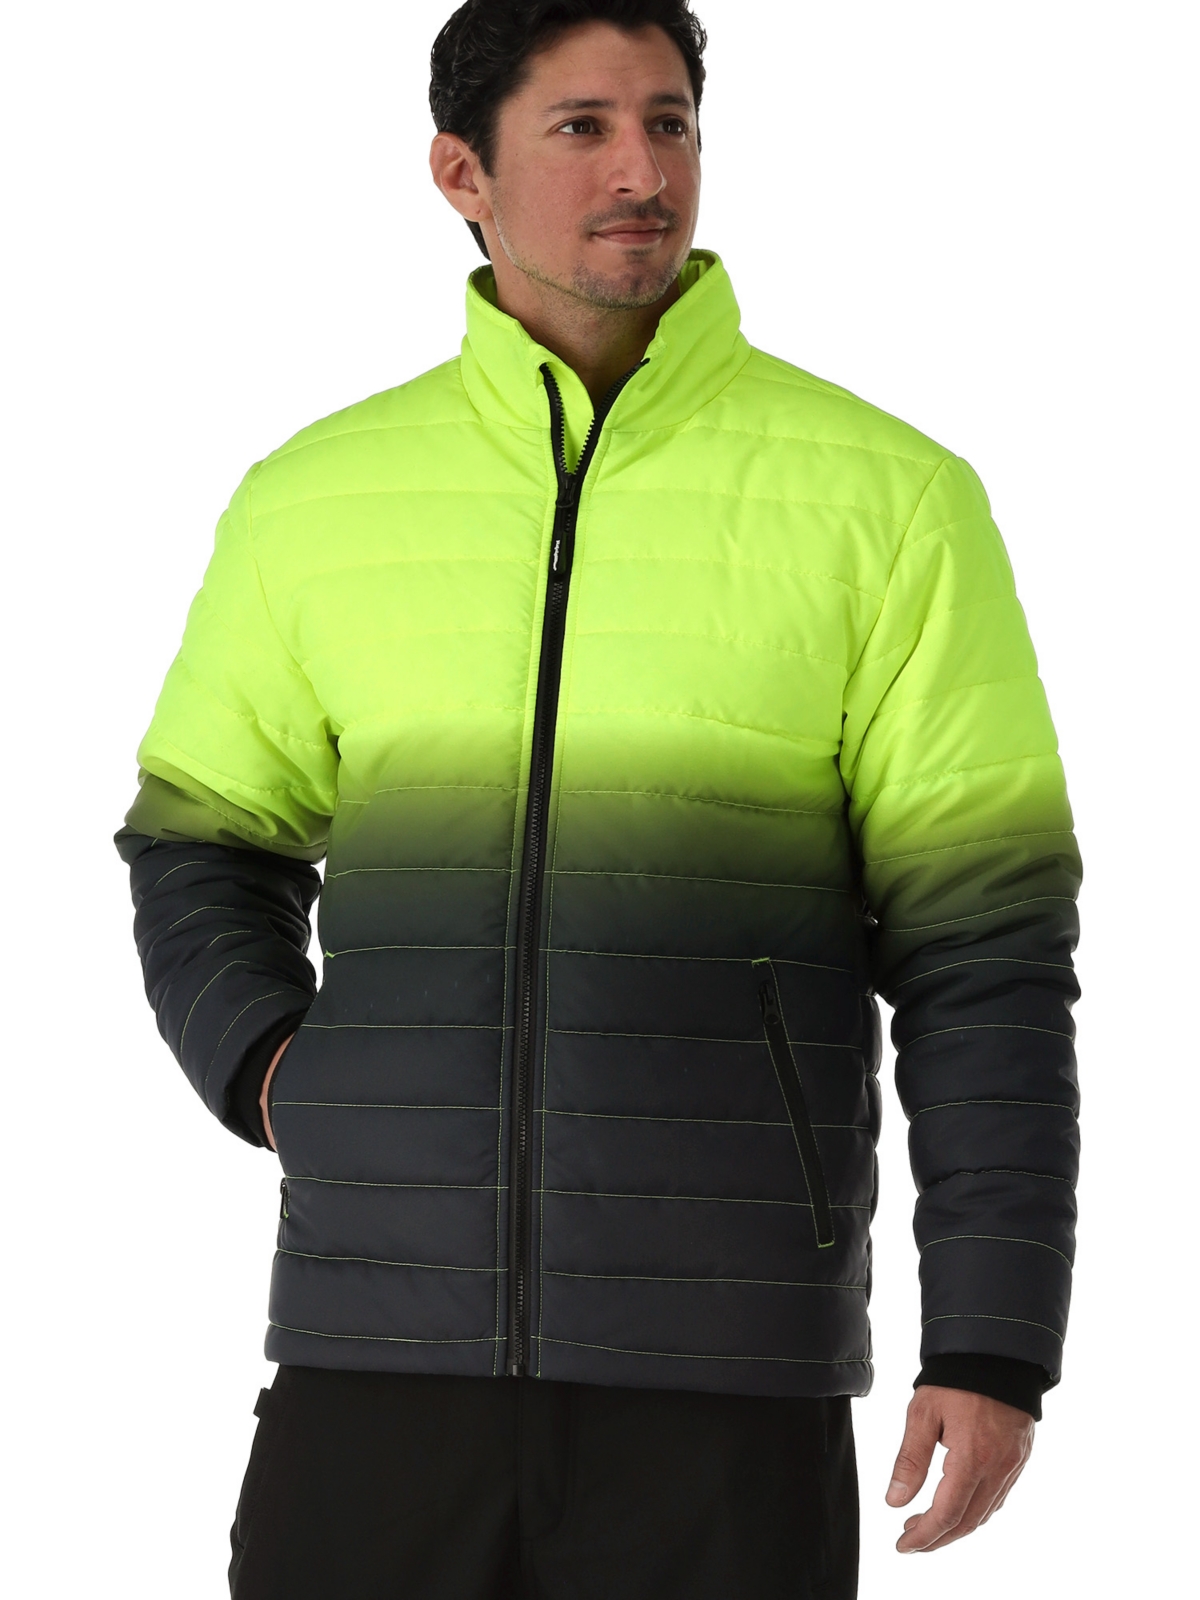 Big & Tall Enhanced Visibility Insulated Quilted Jacket - Lime